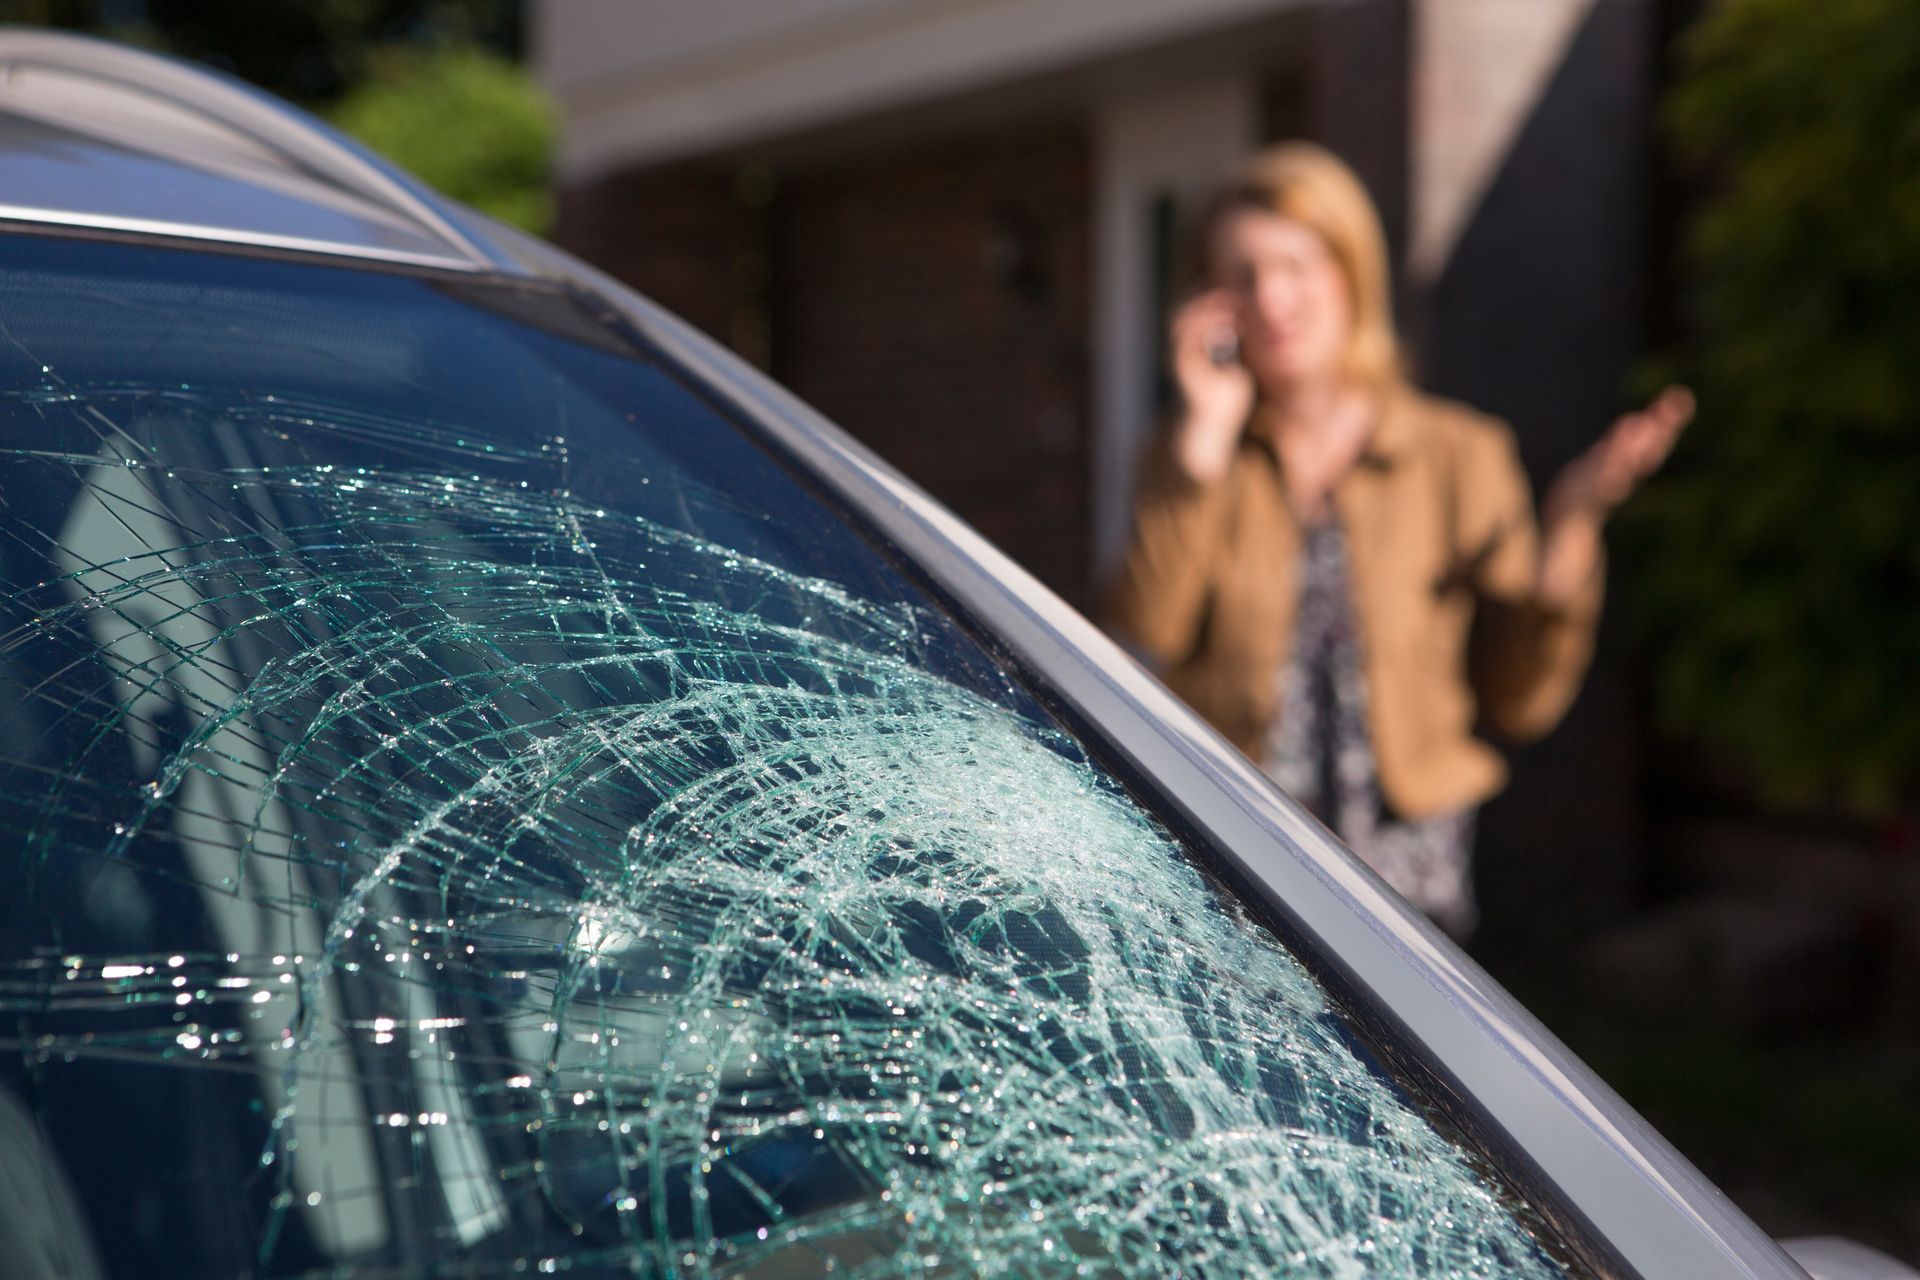 a woman is talking on a cell phone in front of a car with a broken windshield